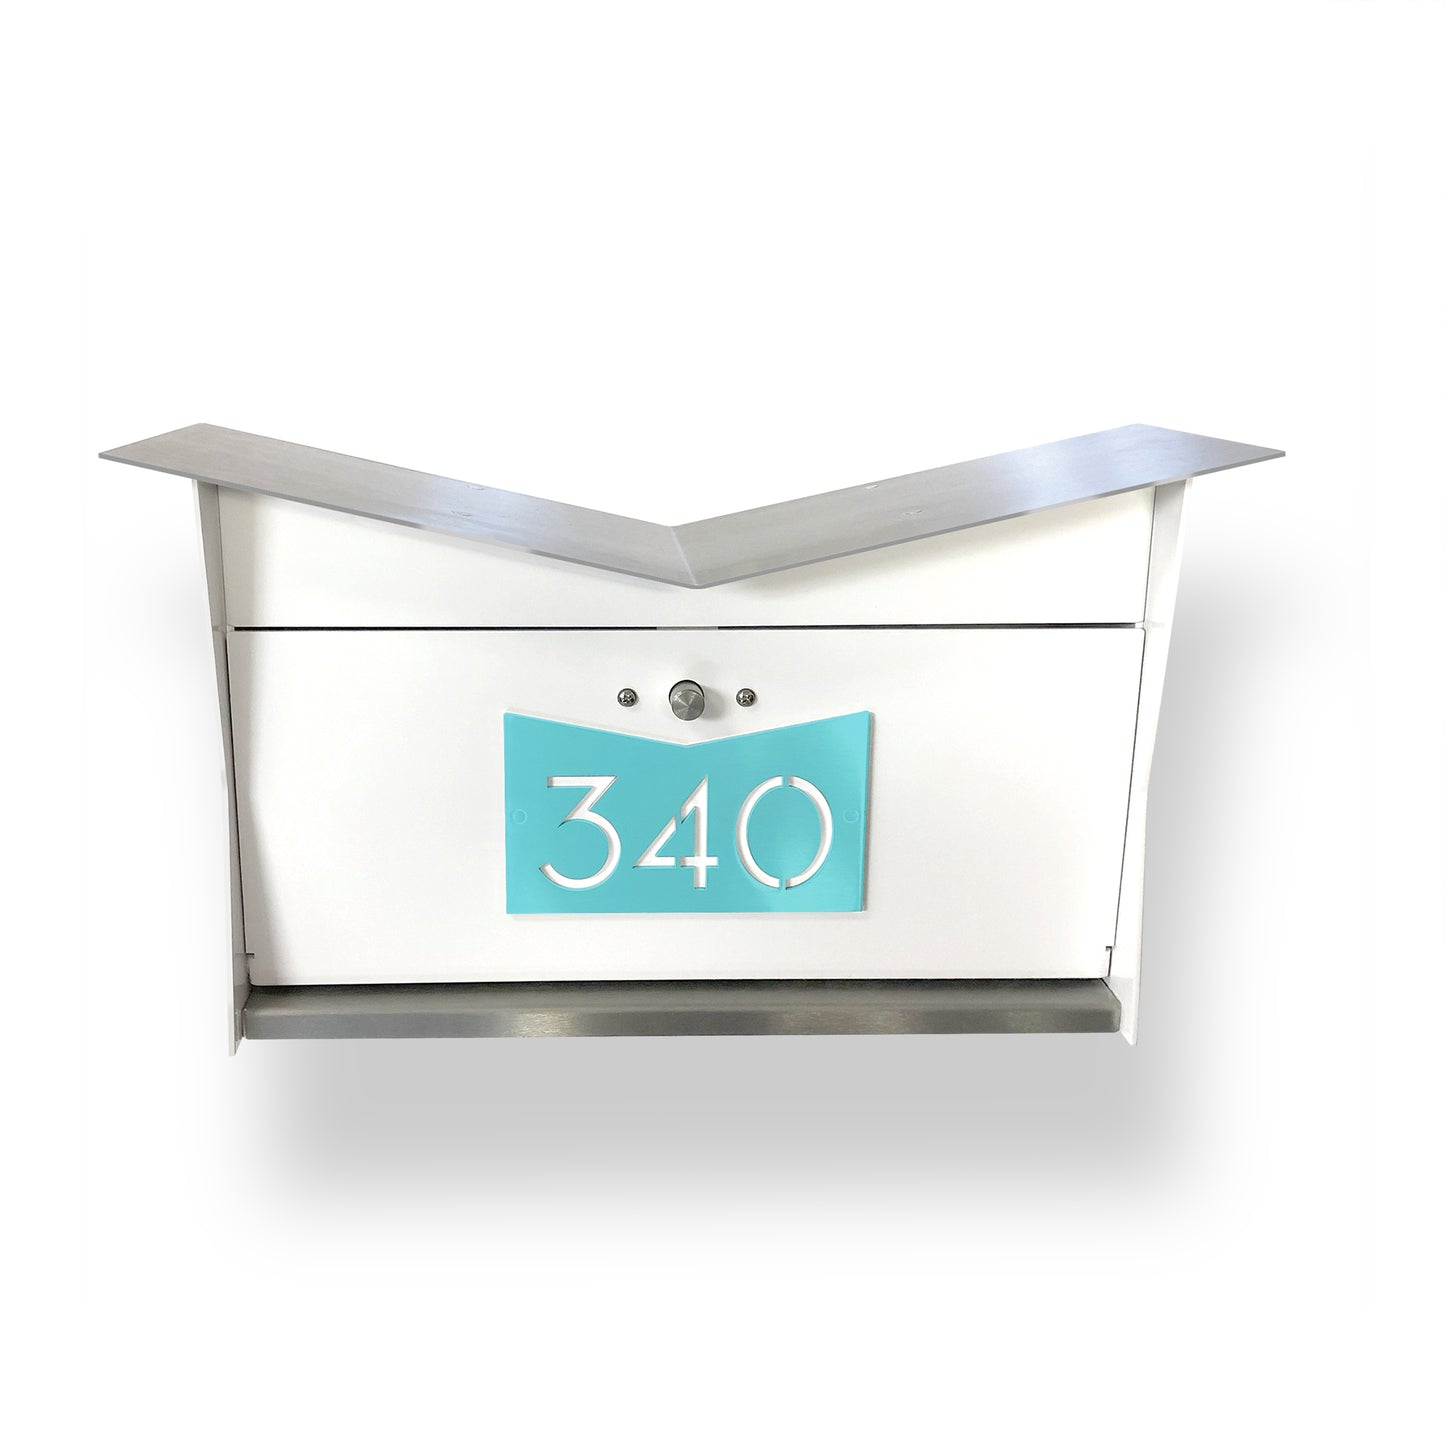 ButterFly Box in ARCTIC WHITE - Wall Mount Mailbox